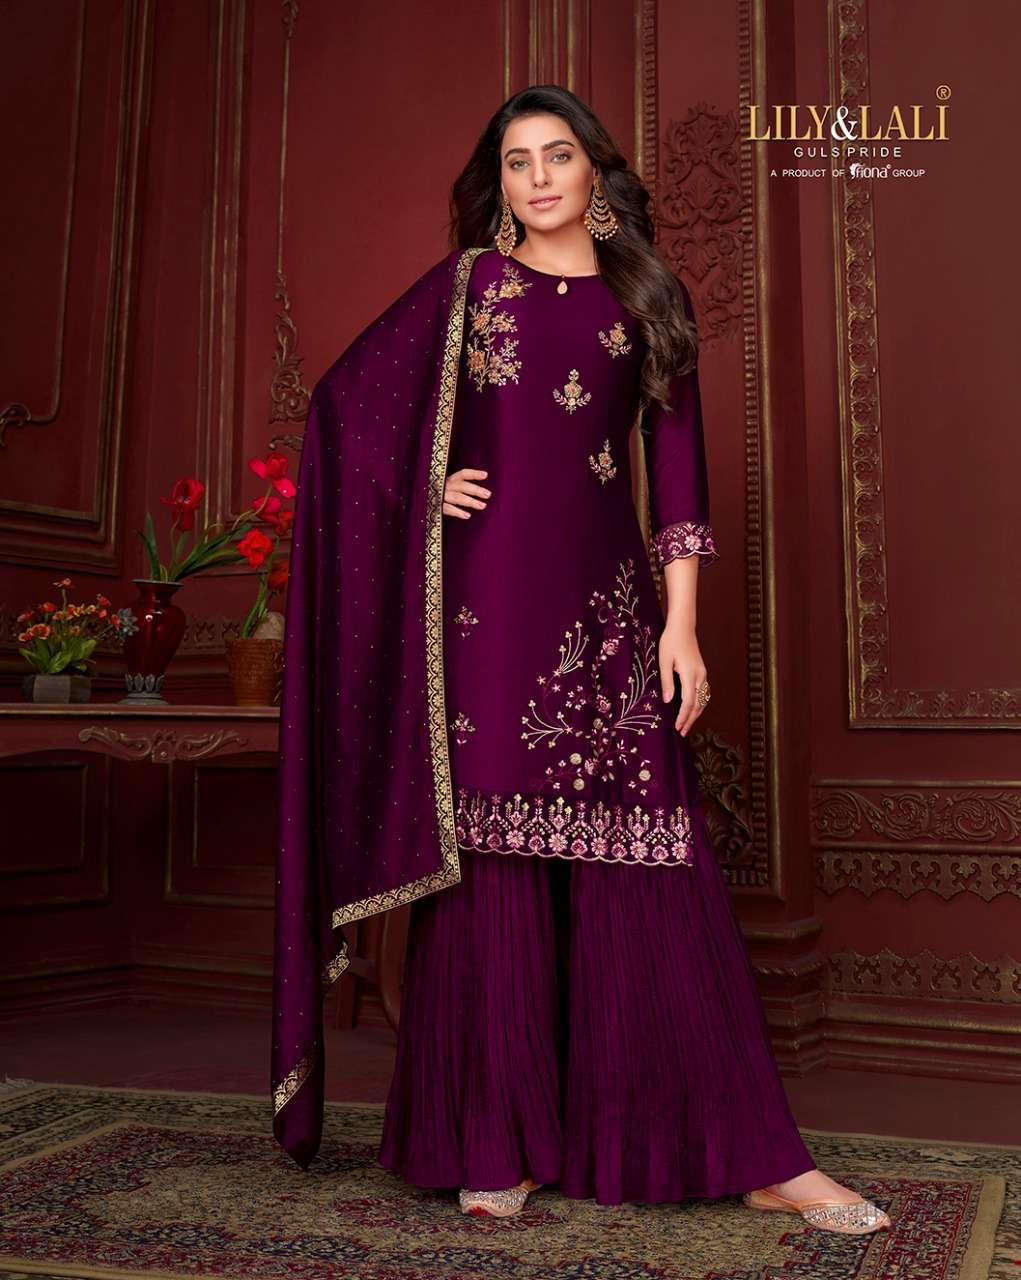 Lily And Lali Malang Catalog Exclusive Ready Made Dress Materials Wholesale